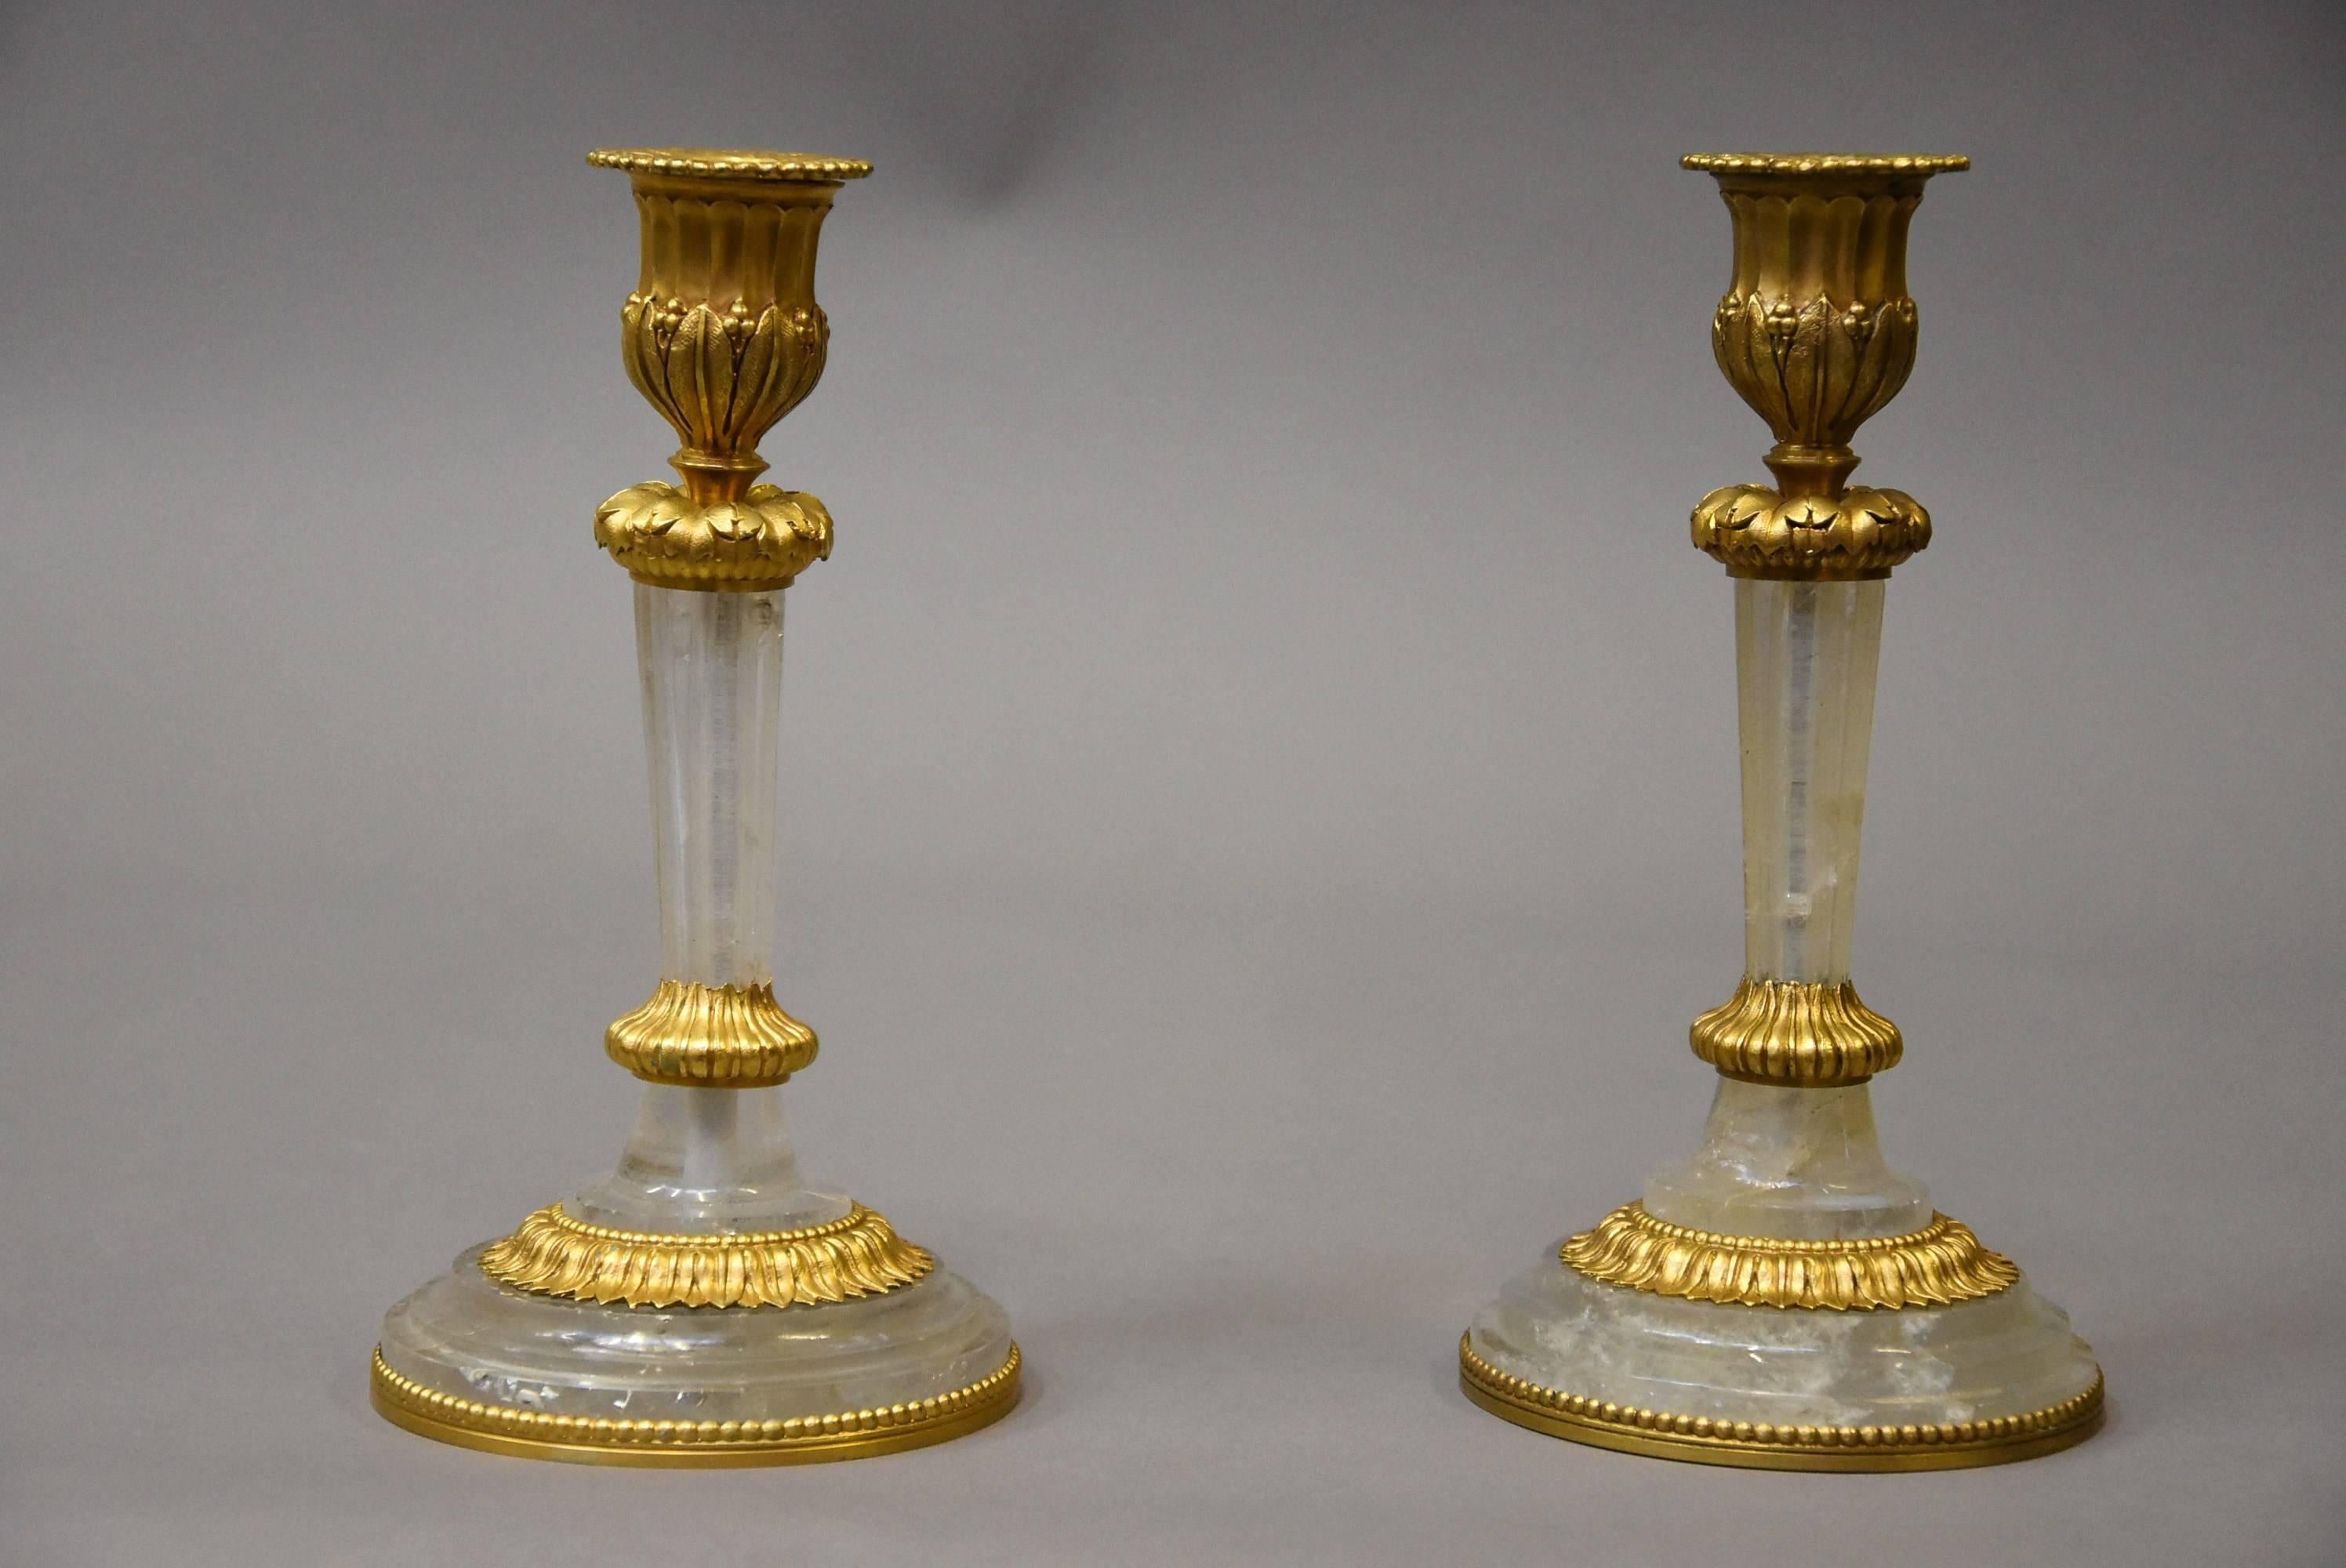 Pair of Elegant Early 20th Century Rock Crystal and Ormolu Candlesticks For Sale 2